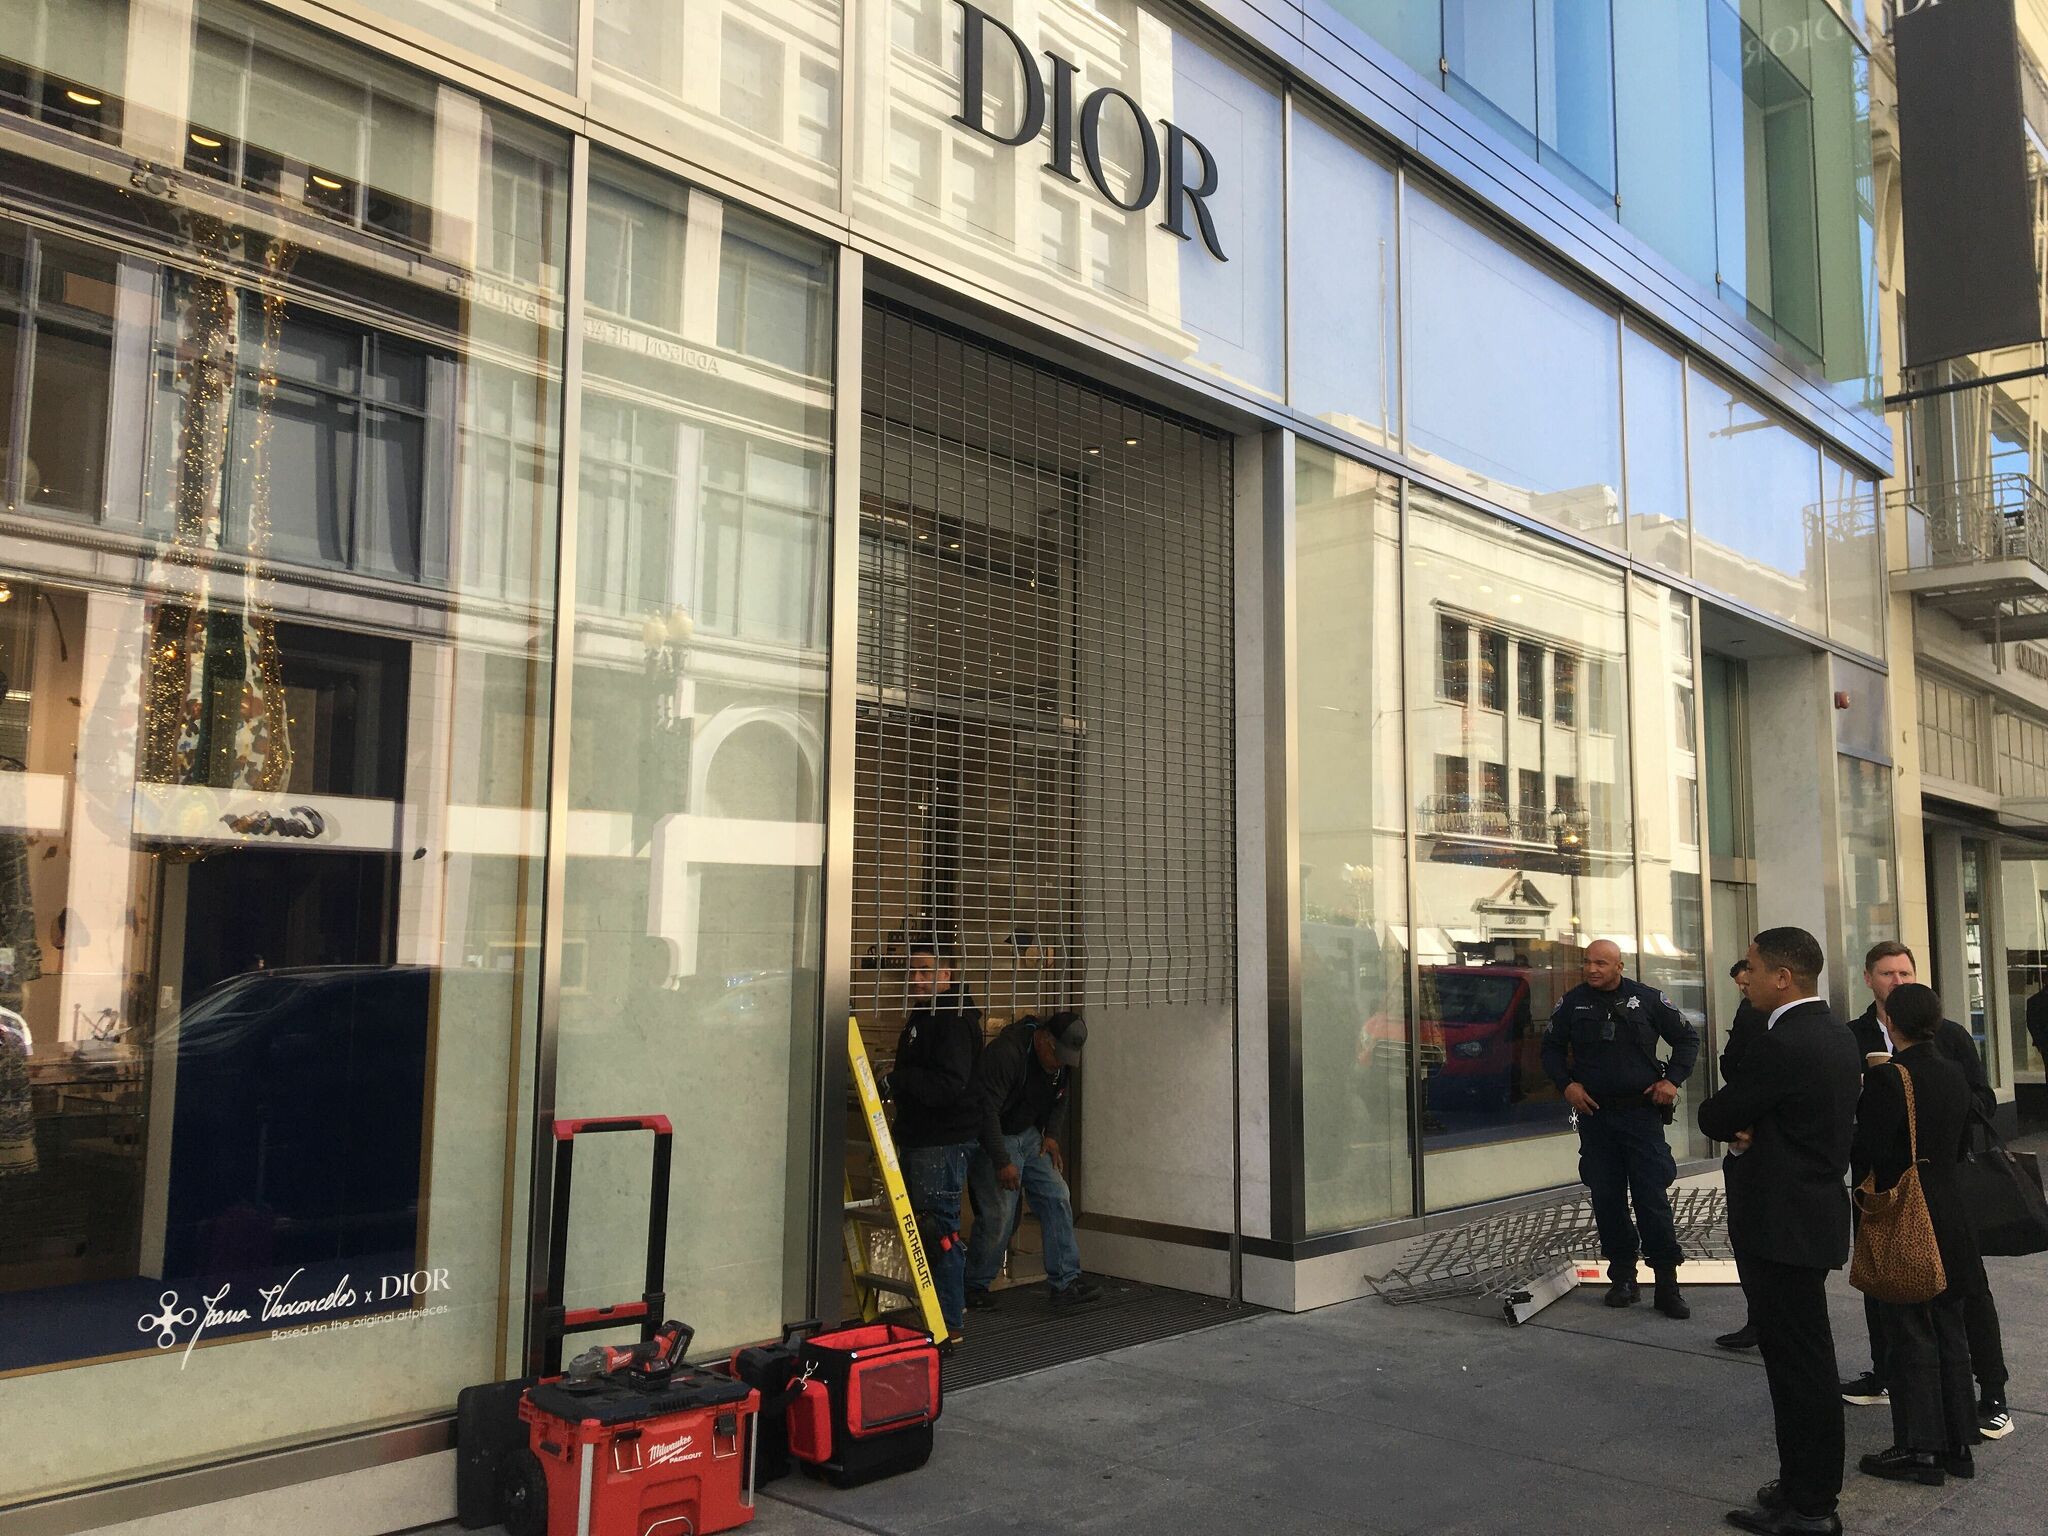 Robbery of the San Francisco Dior store in Union Square